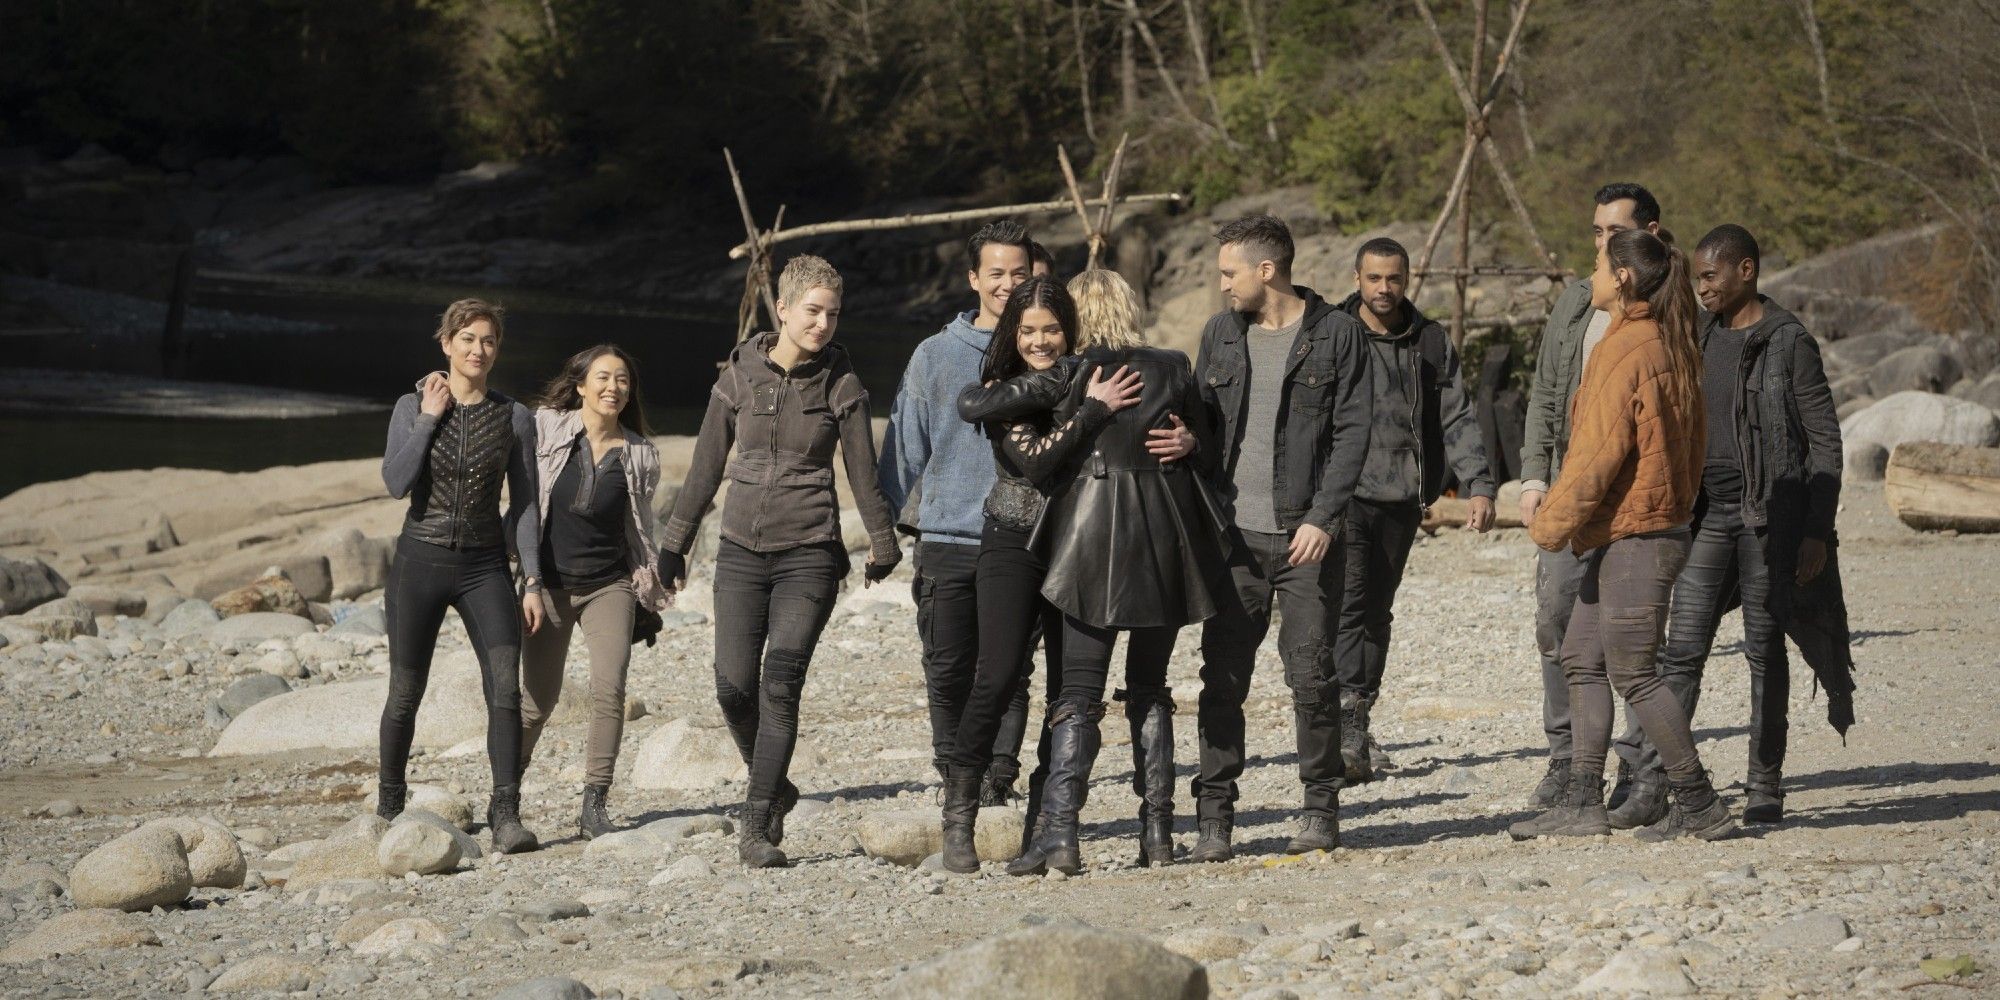 Clarke Griffin reunites with Octavia Blake and her friends on the beach in The 100 series finale